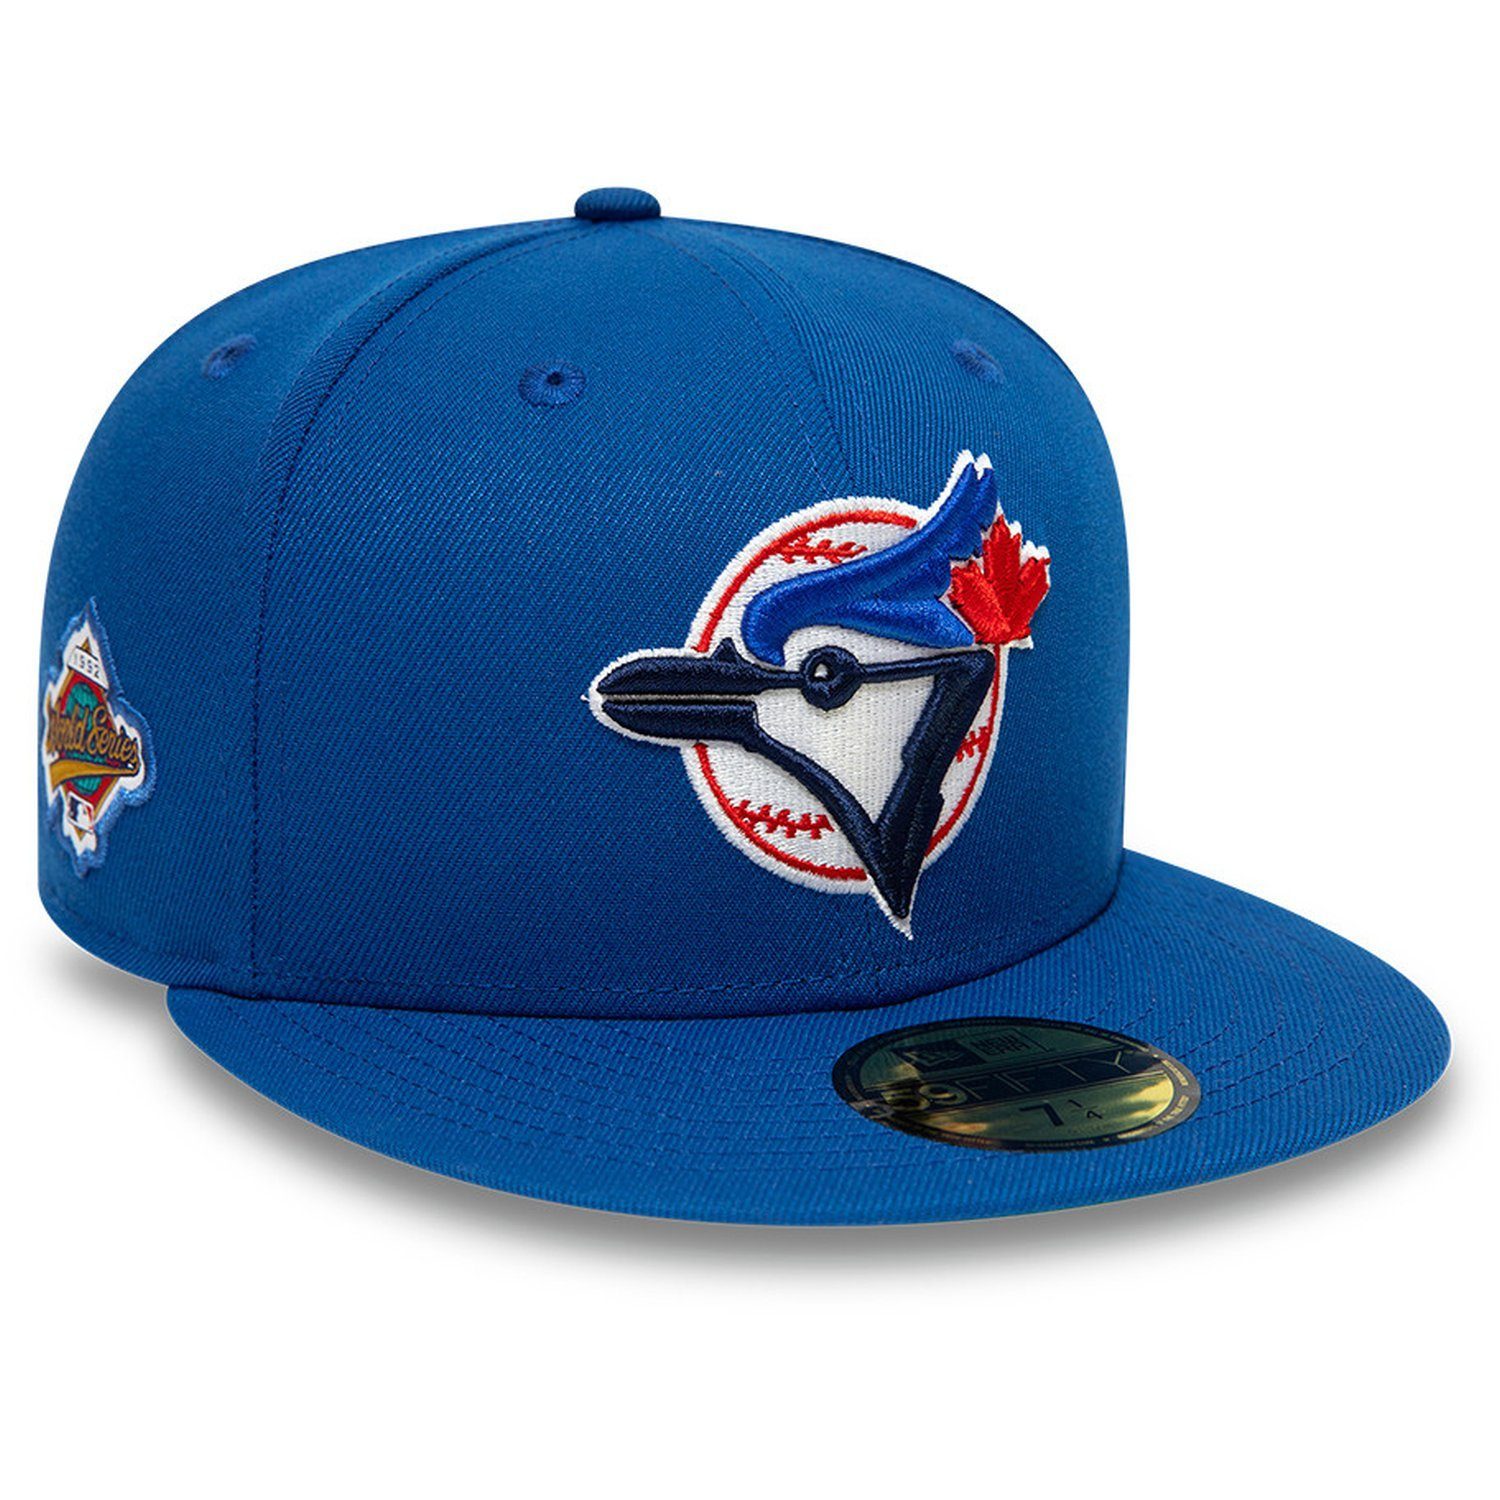 New Era Fitted Cap 59Fifty WORLD SERIES Toronto Jays